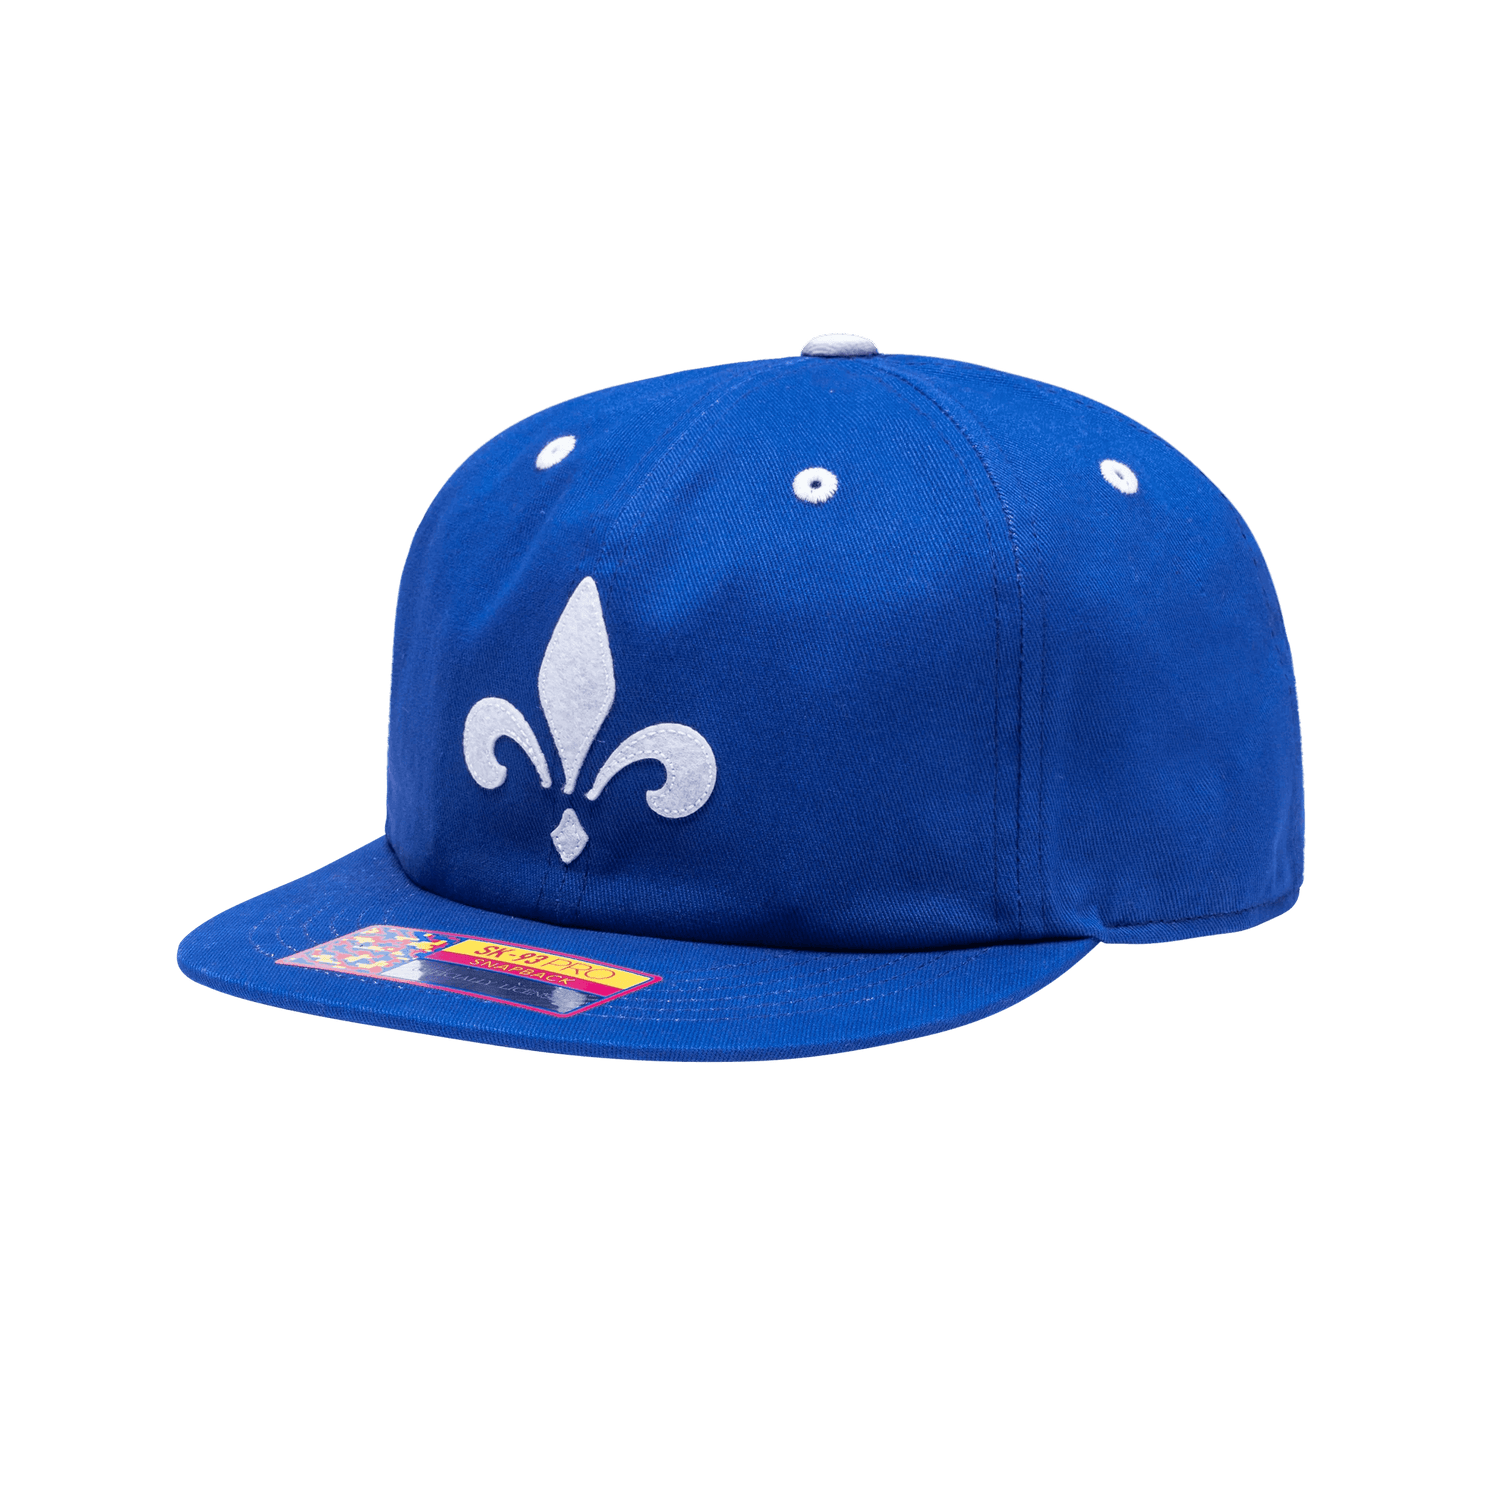 FI Collection Club PSG Bankroll Snapback Hat (Lateral - Side 1)